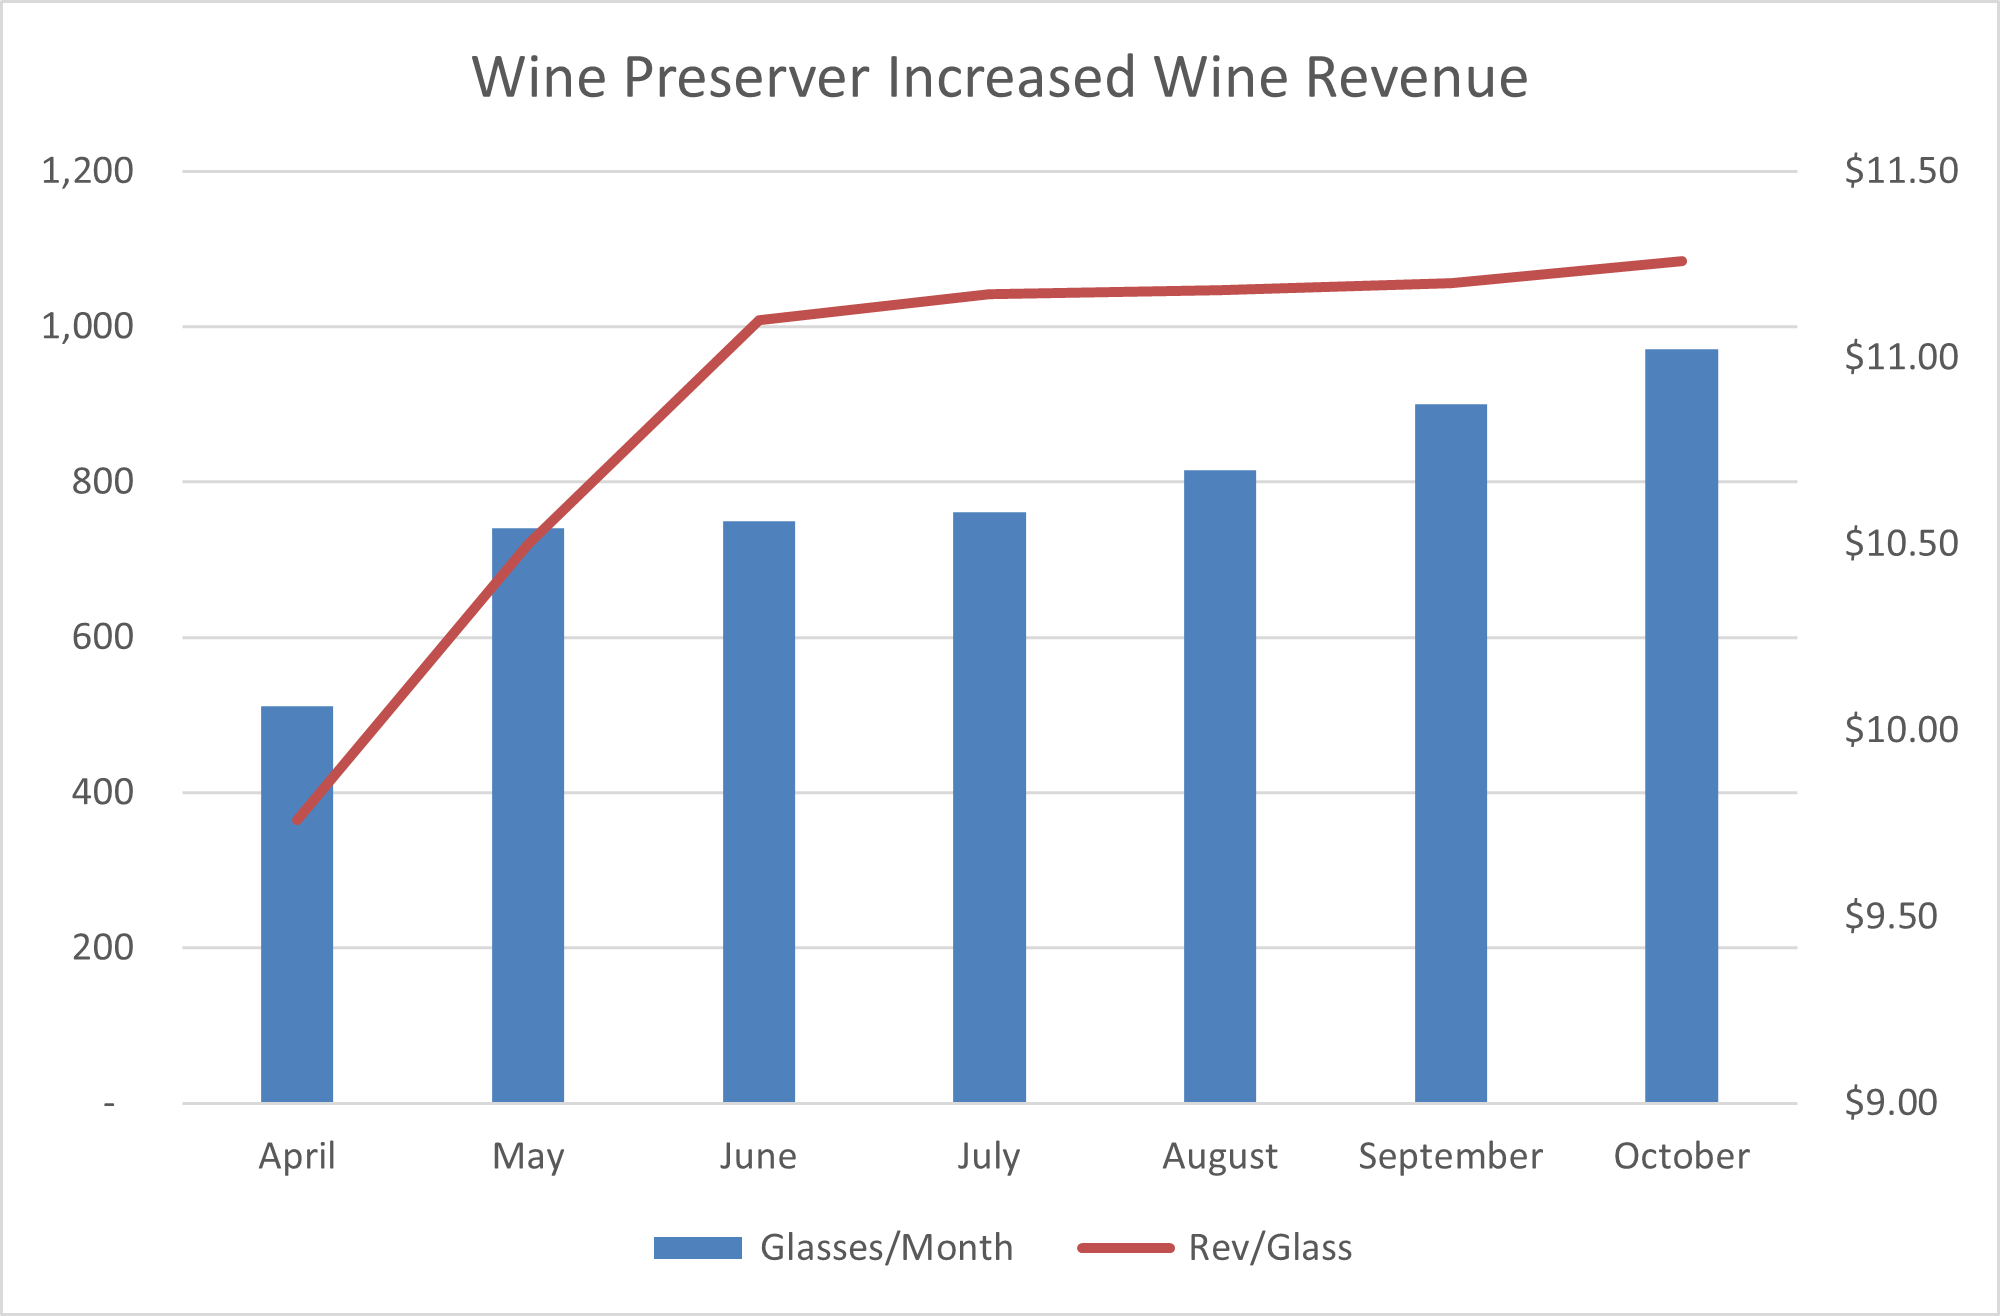 Revenue Increase from Selling More and Better Quality Wine On Premise